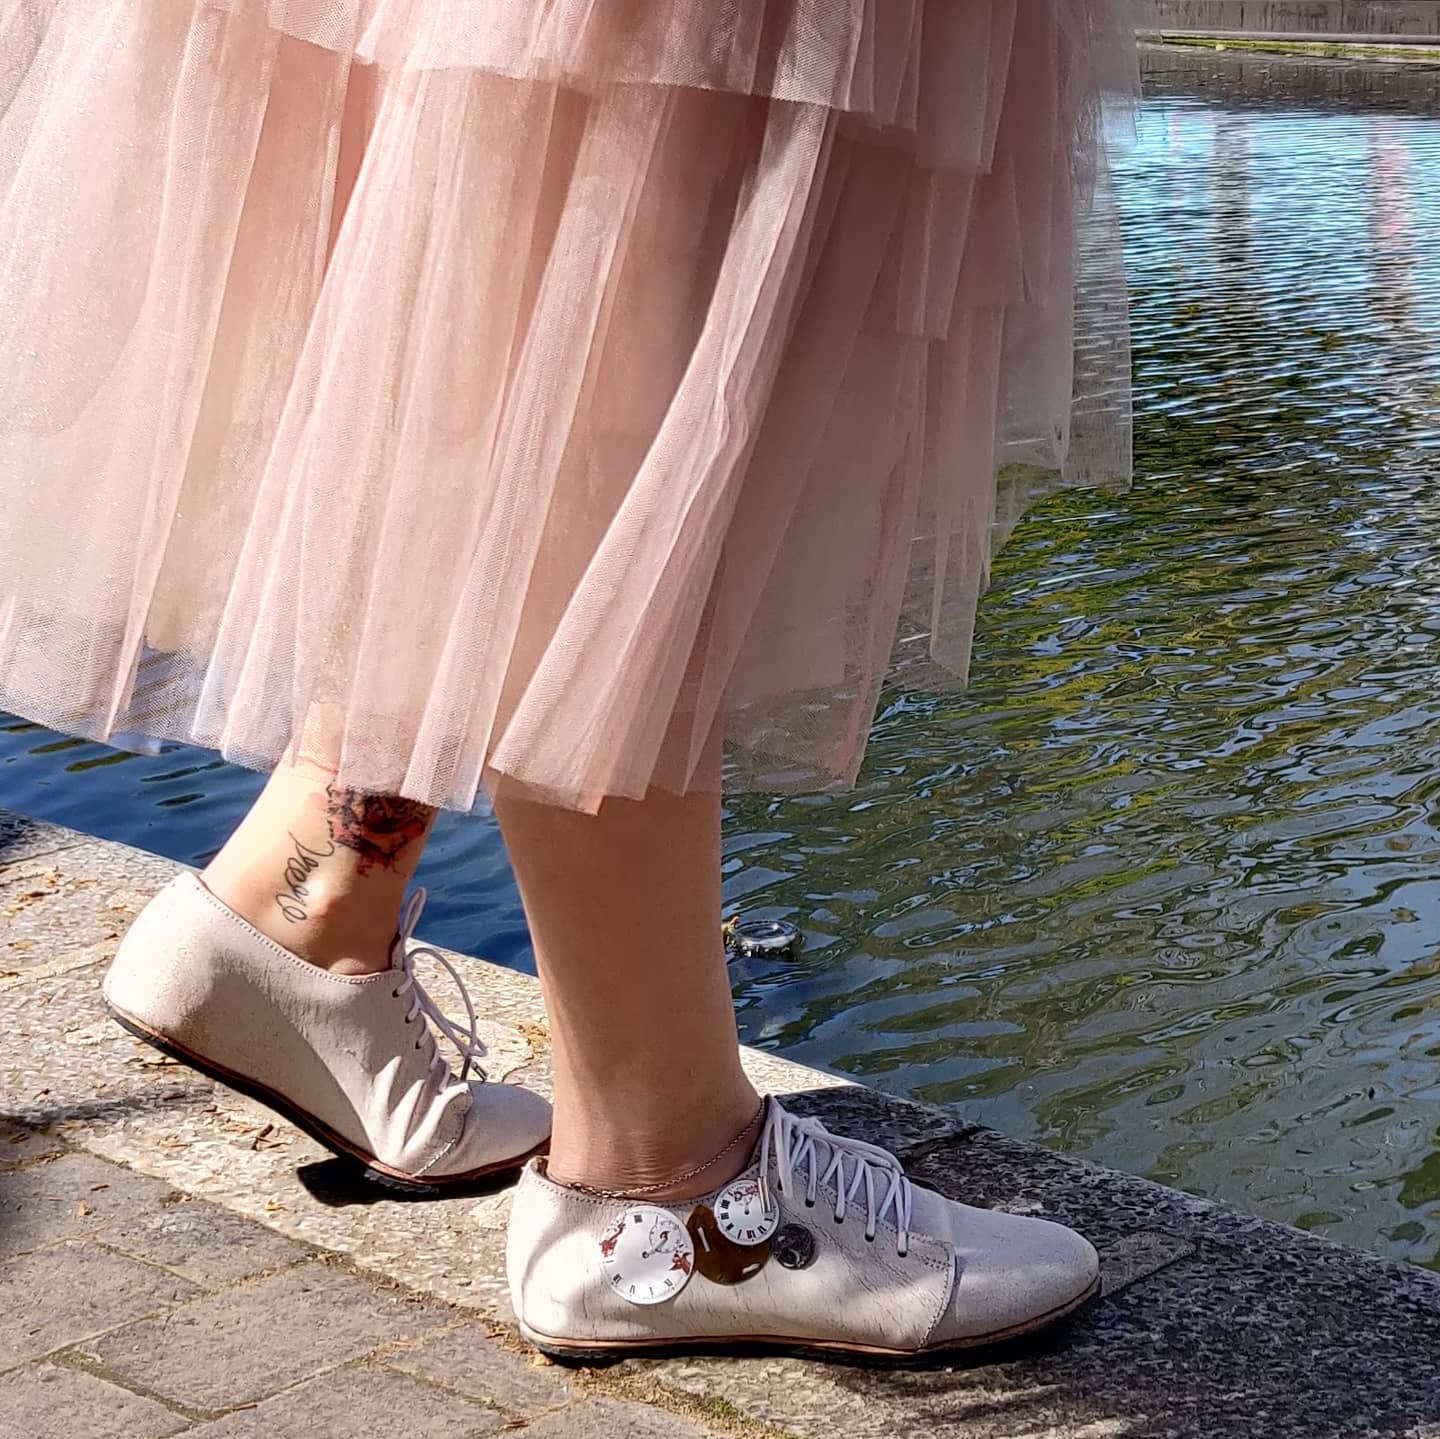 Myself modelling the shoes with a pink tule skirt with a waterway background